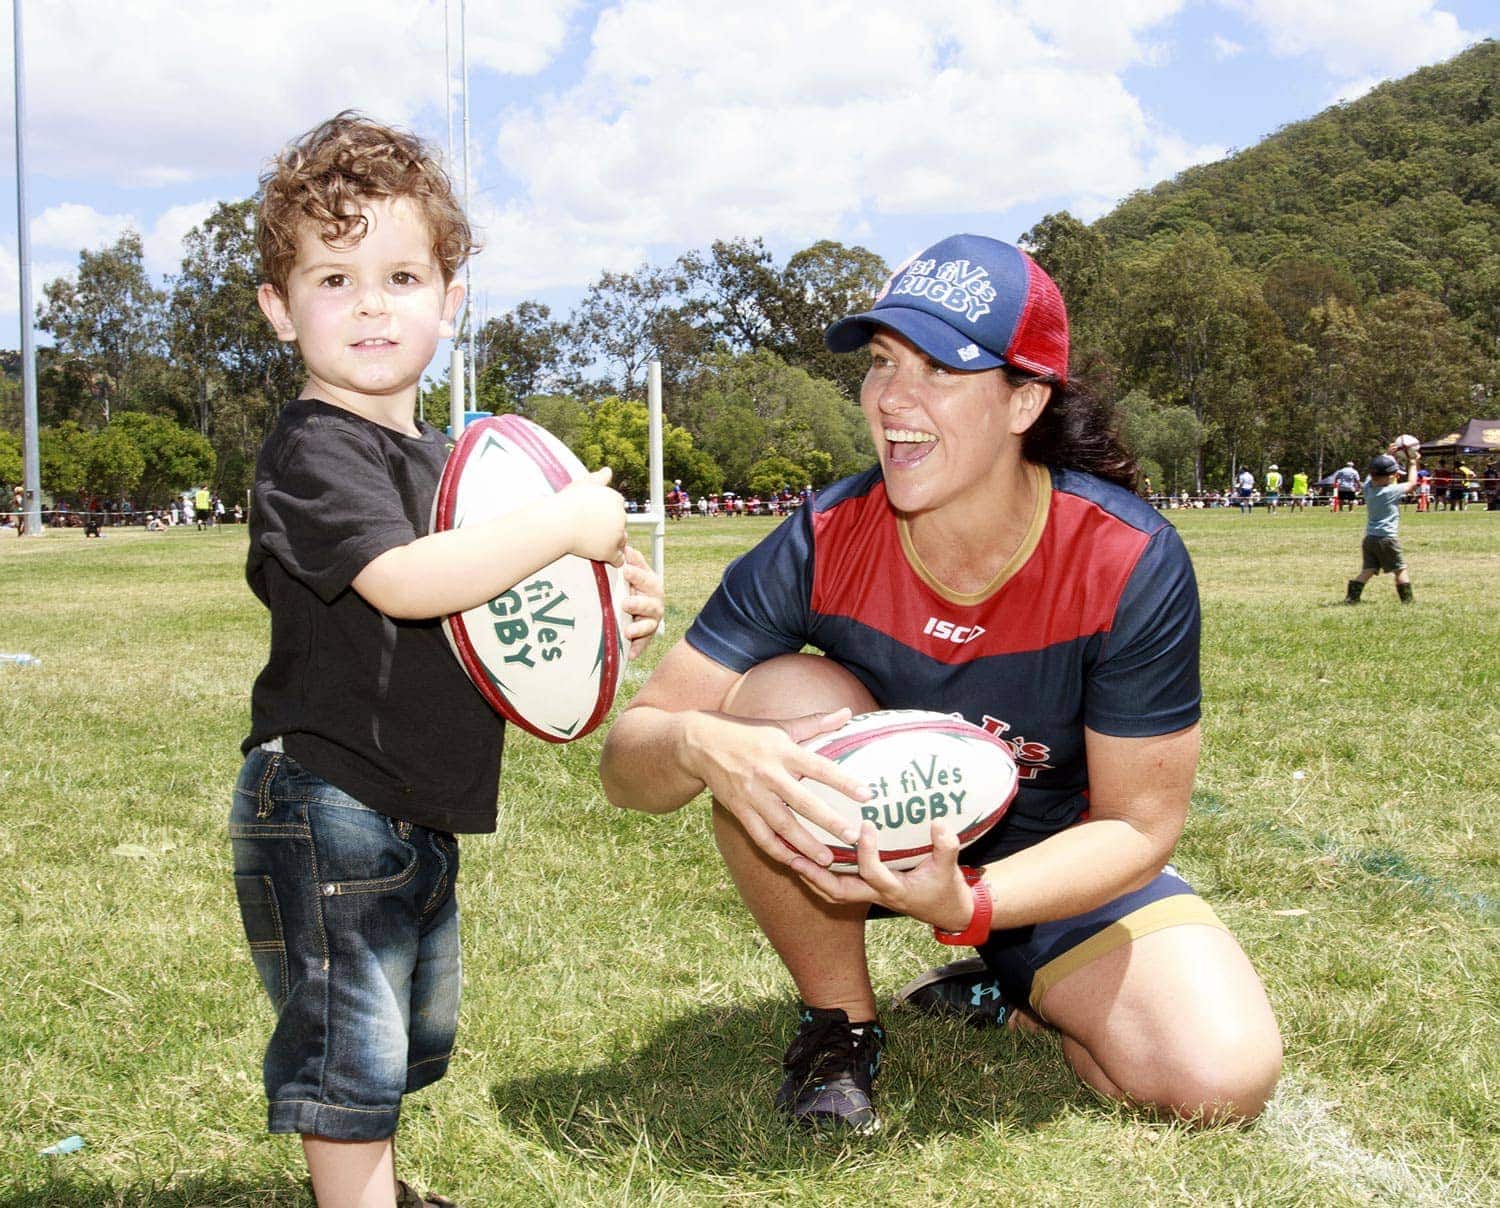 Child Smiling Playing Rugby